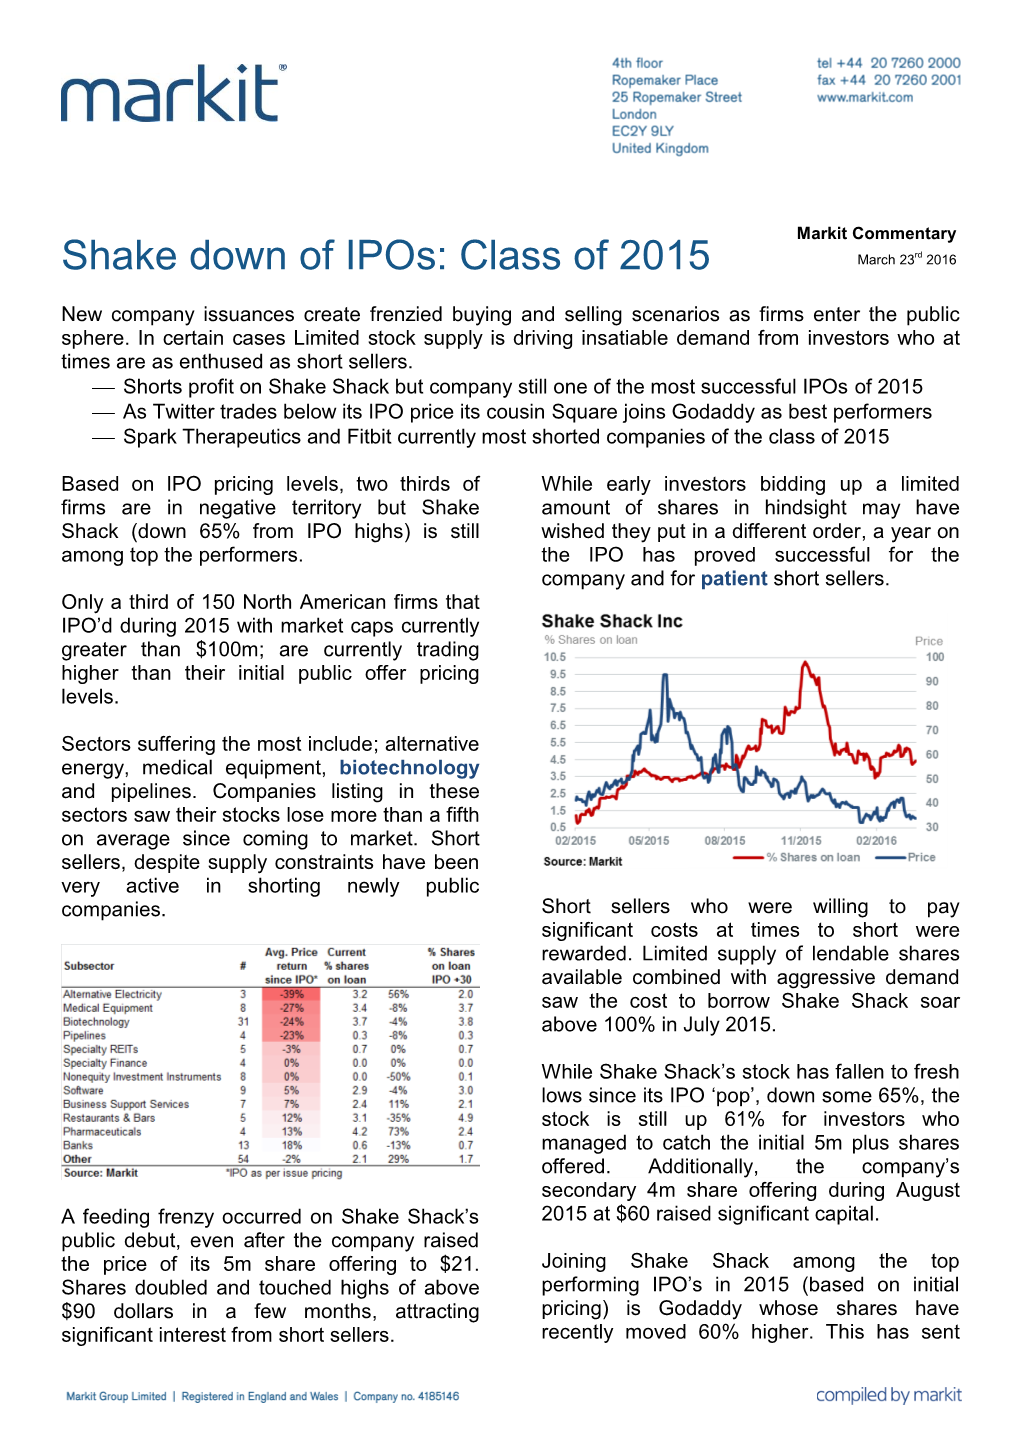 Shake Down of Ipos: Class of 2015 March 23Rd 2016